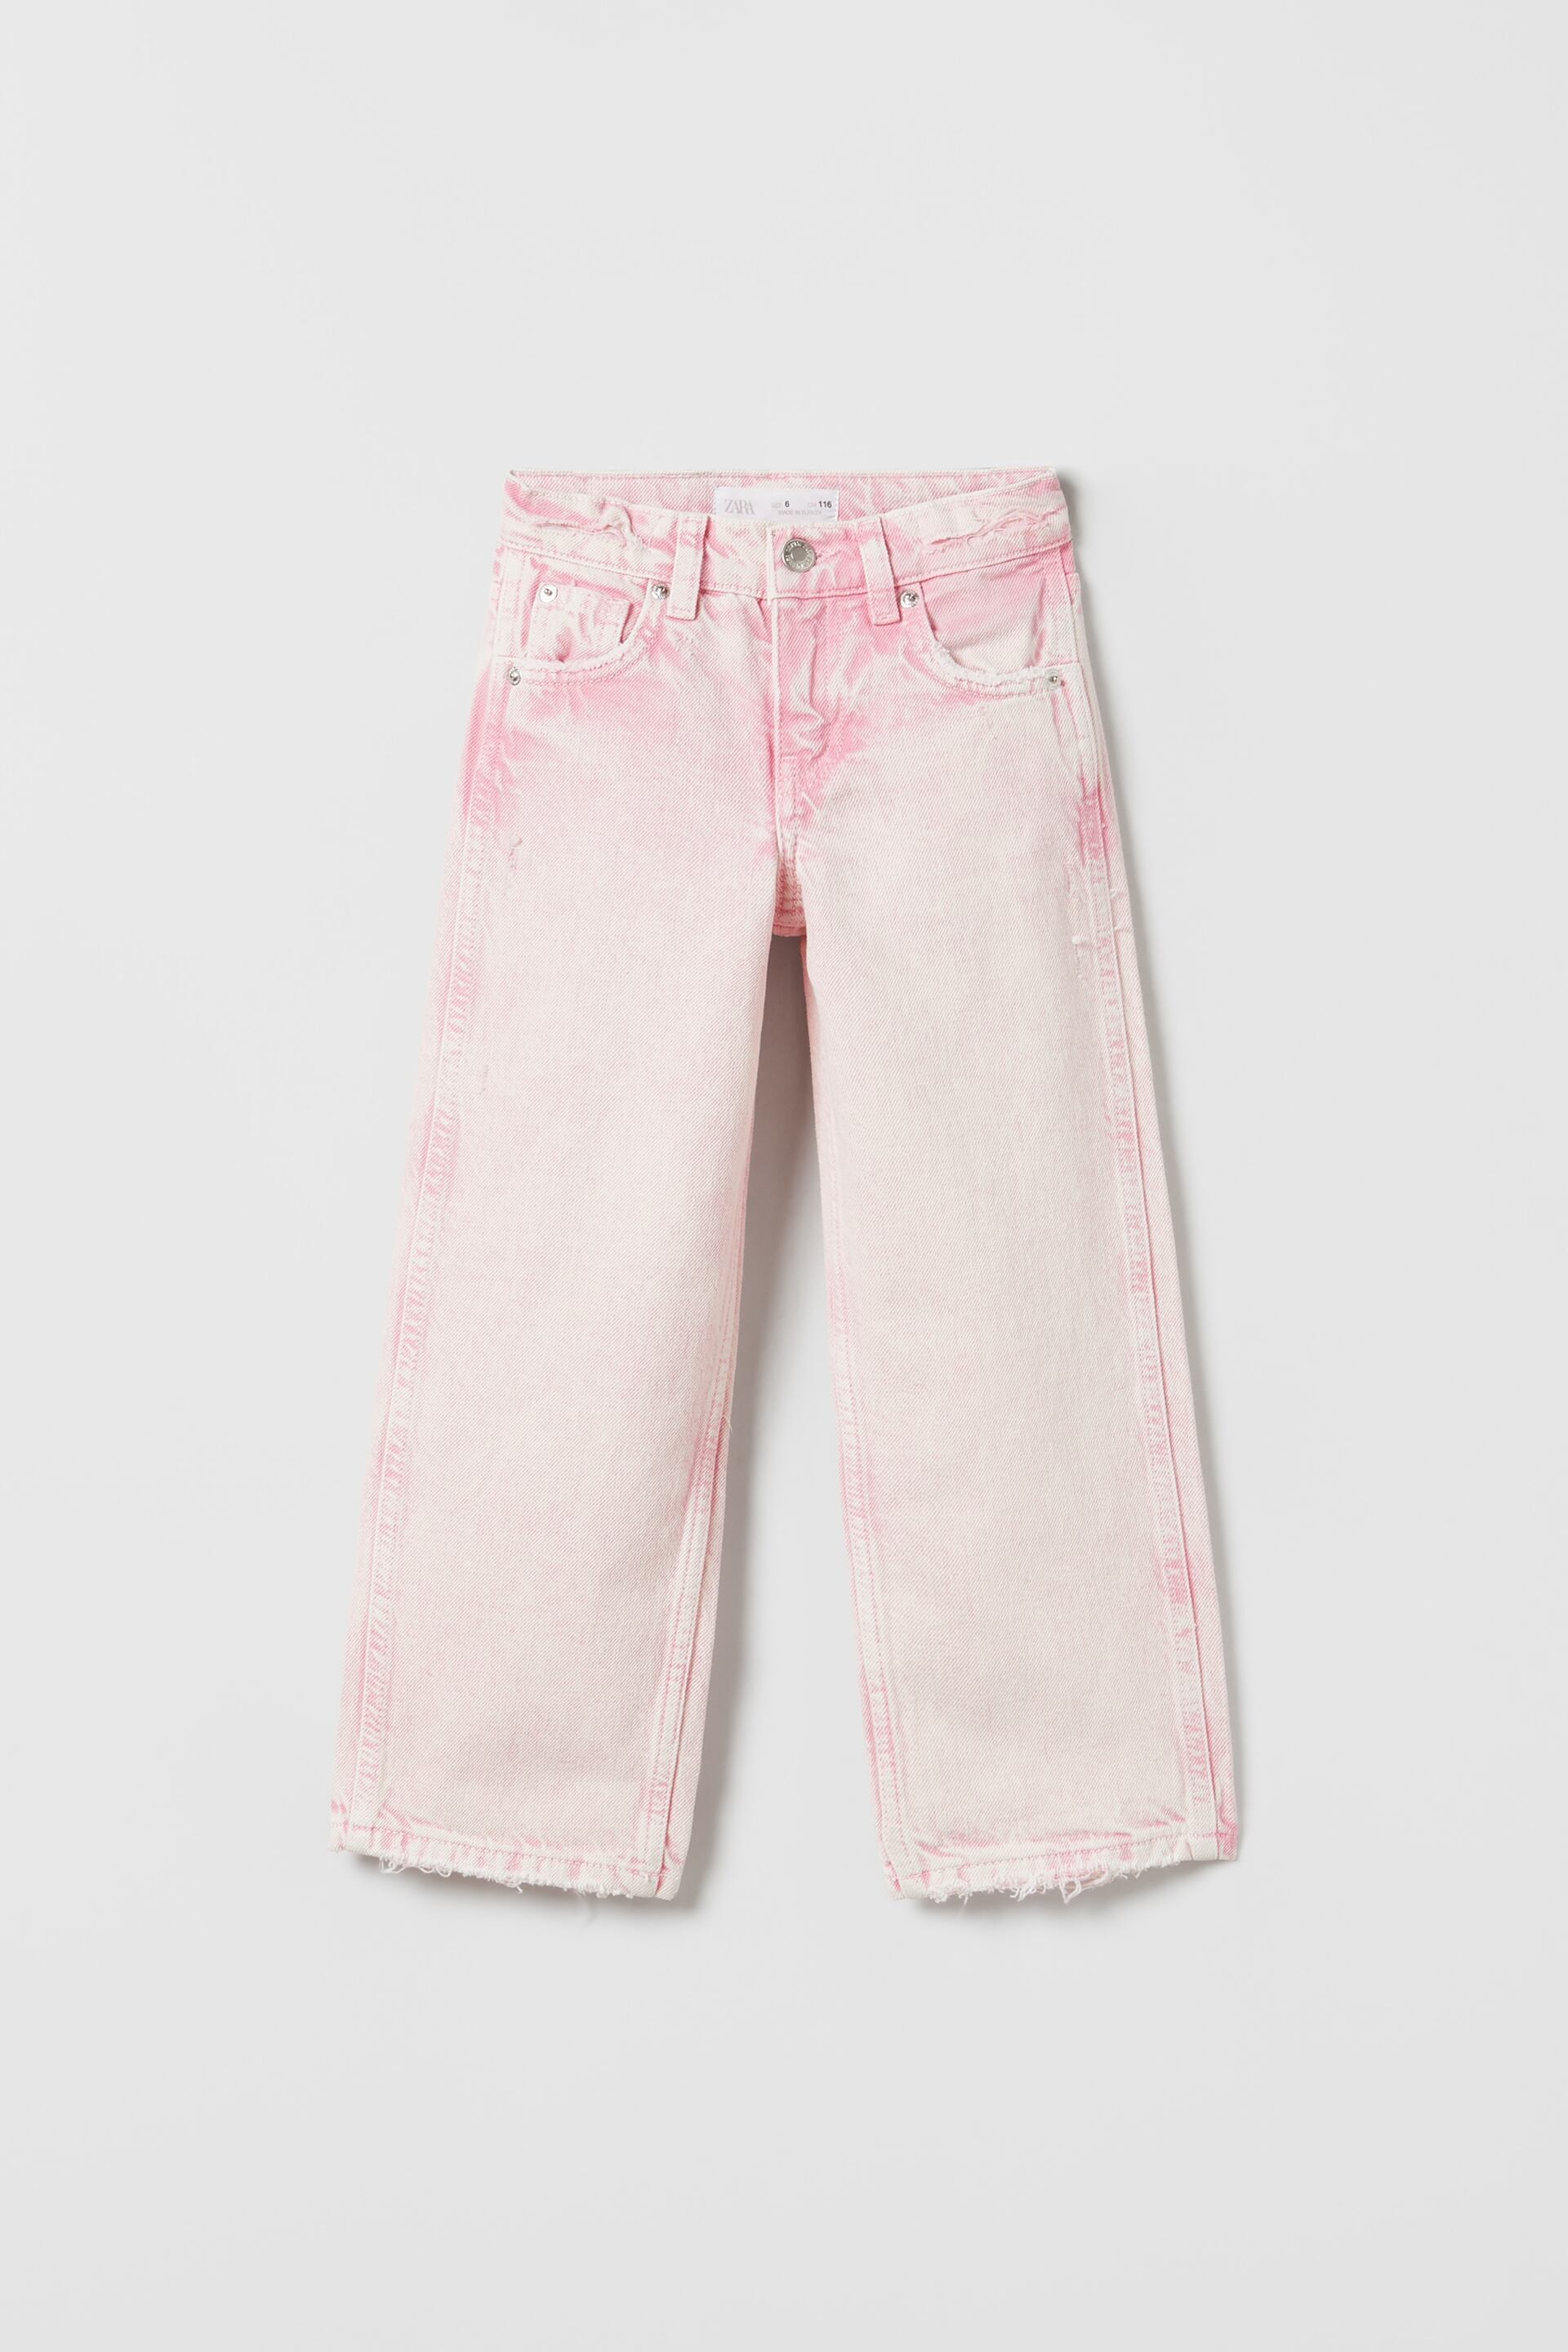 At forurene gardin kulstof WASHED STRAIGHT FIT JEANS - Pale pink | ZARA United States